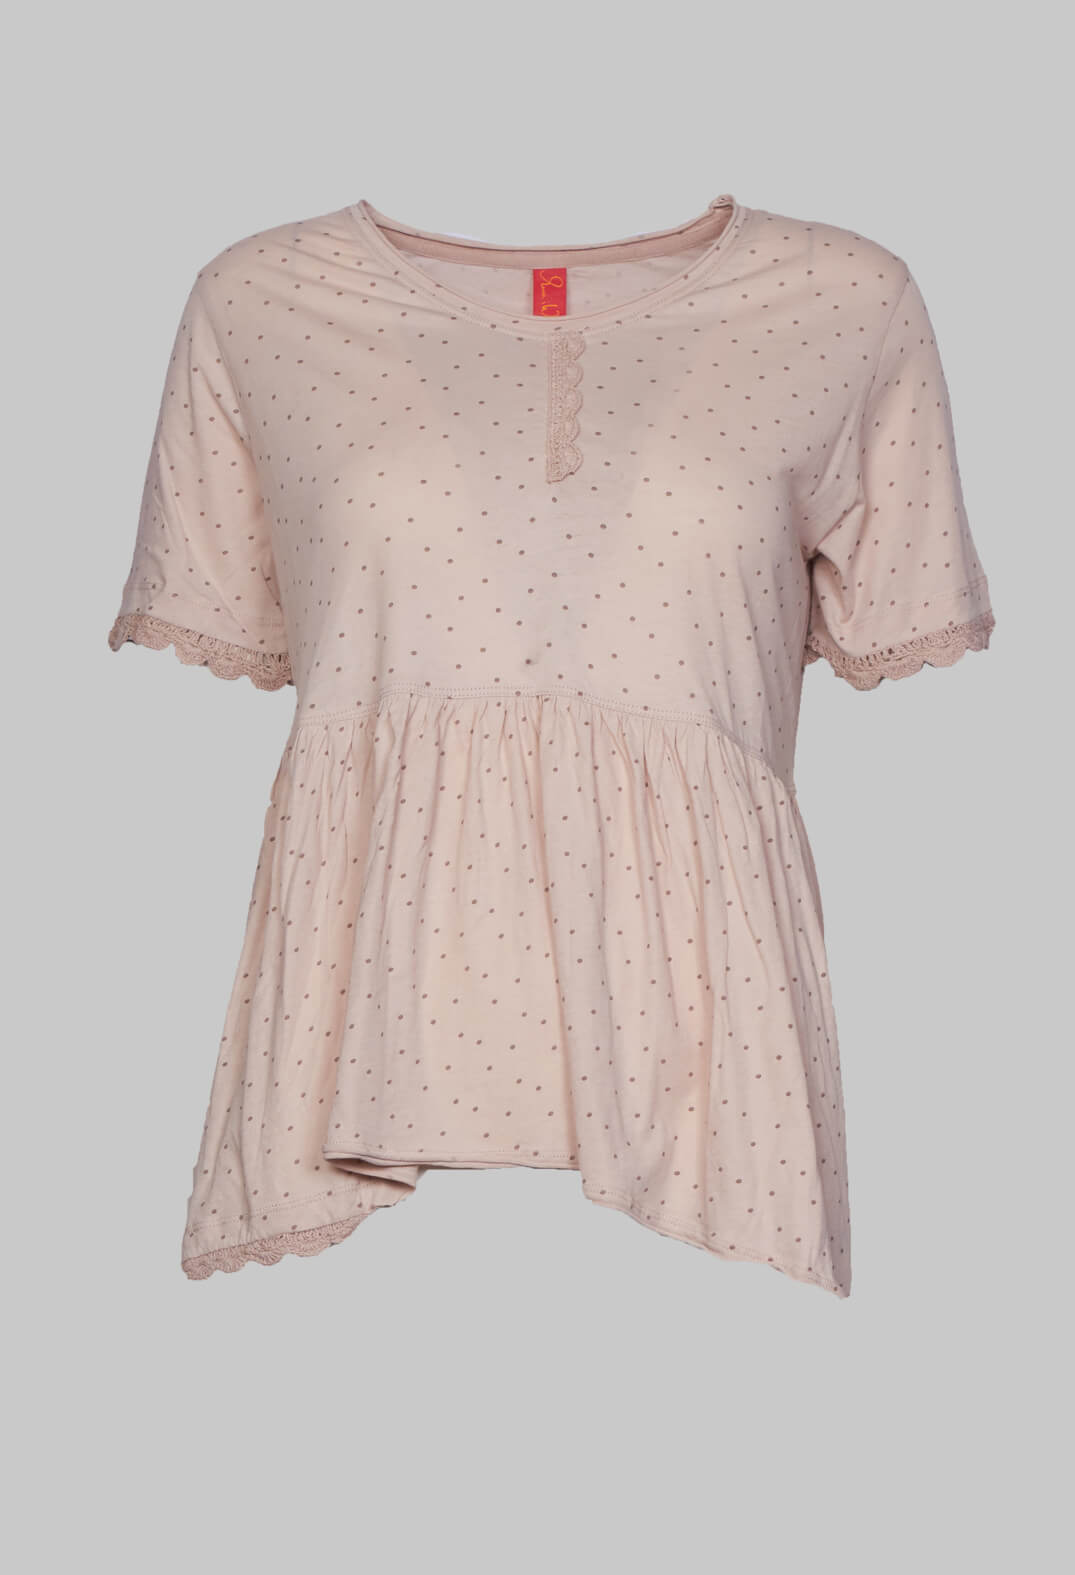 Jersey Top with Flared Hemline in Dots